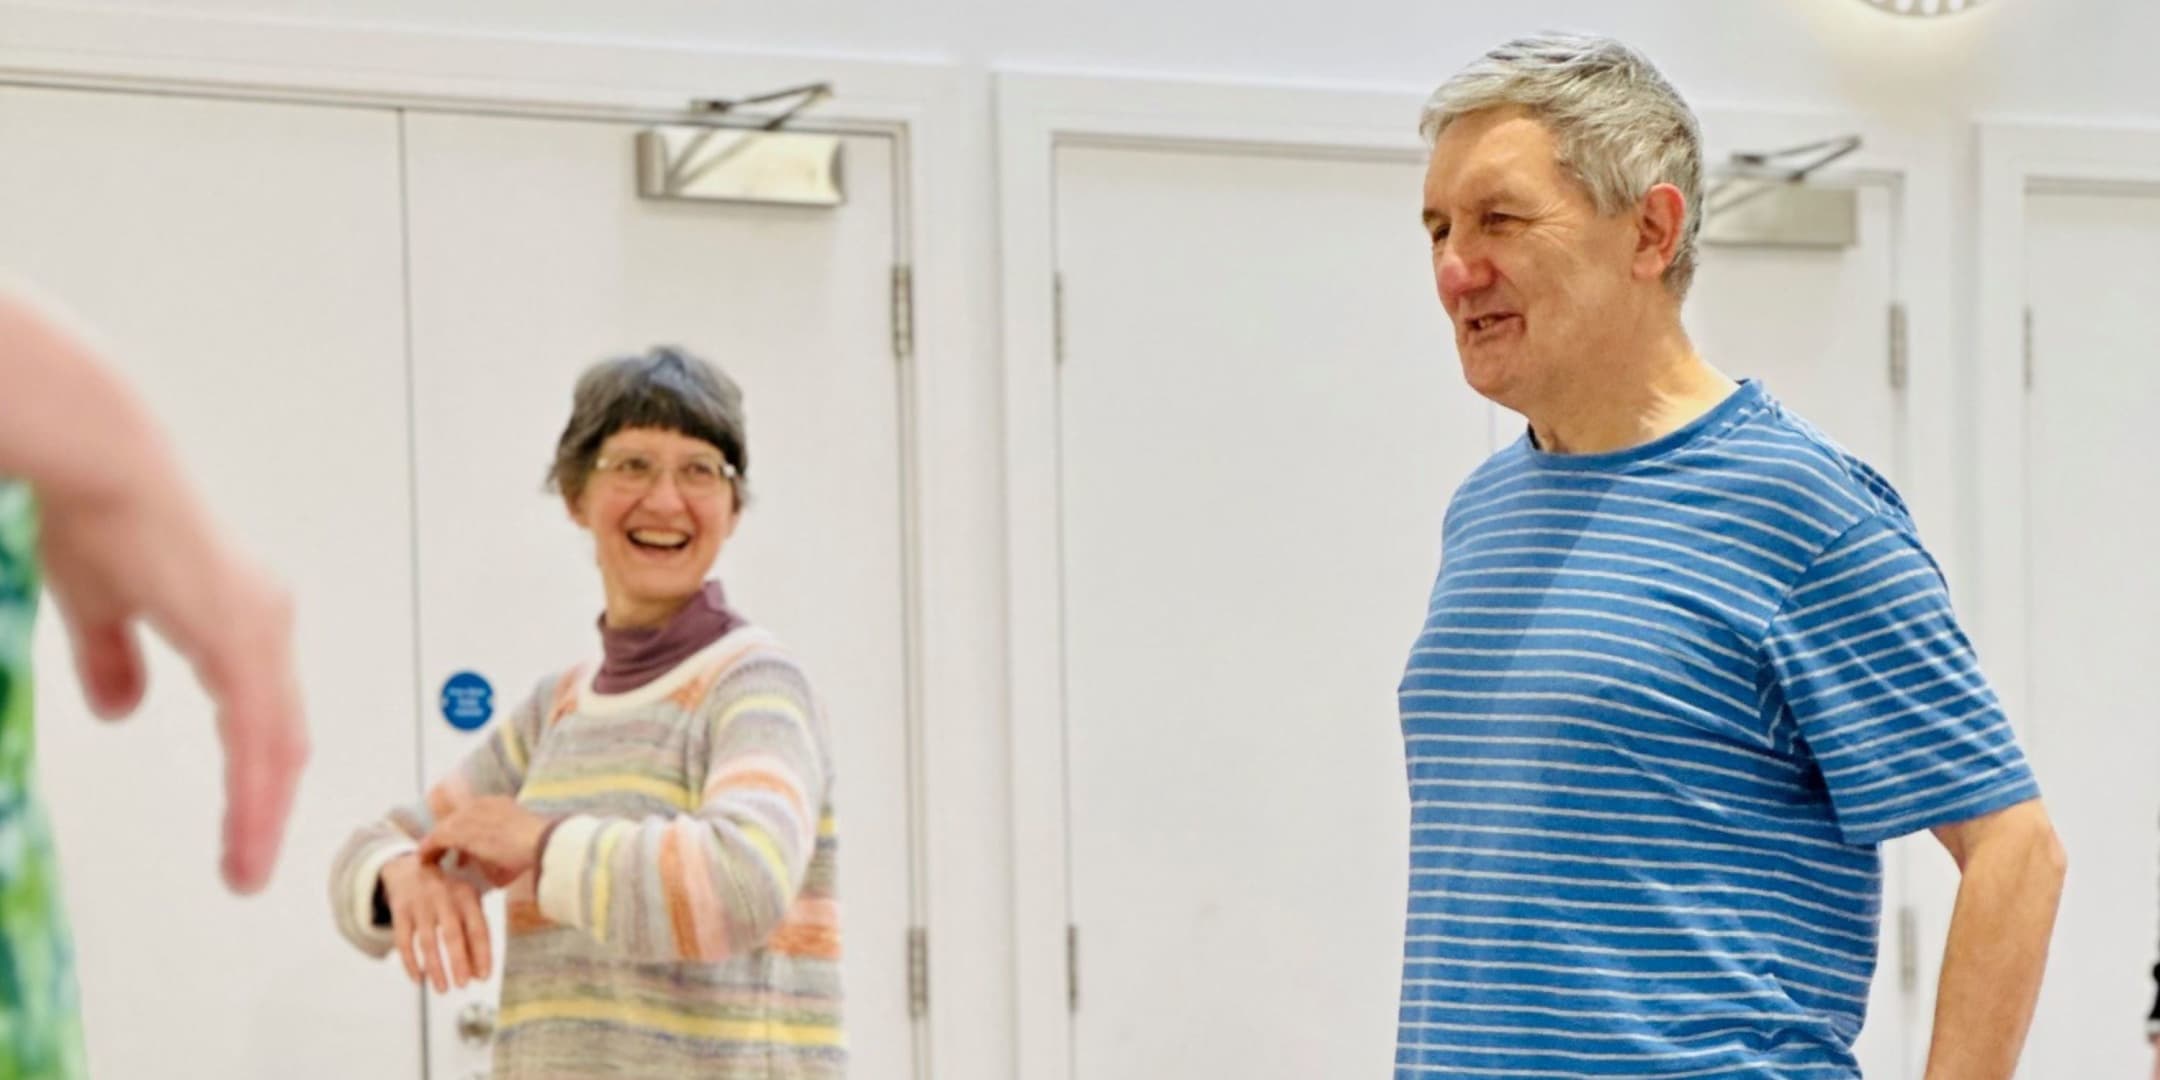 A lady wearing a bright striped jumper looks to the man on her left and smiles - she is holding her arms up and doing exercises. He is wearing a blue T shirt and saying something which is making her laugh. They are in white painted room and the pictu